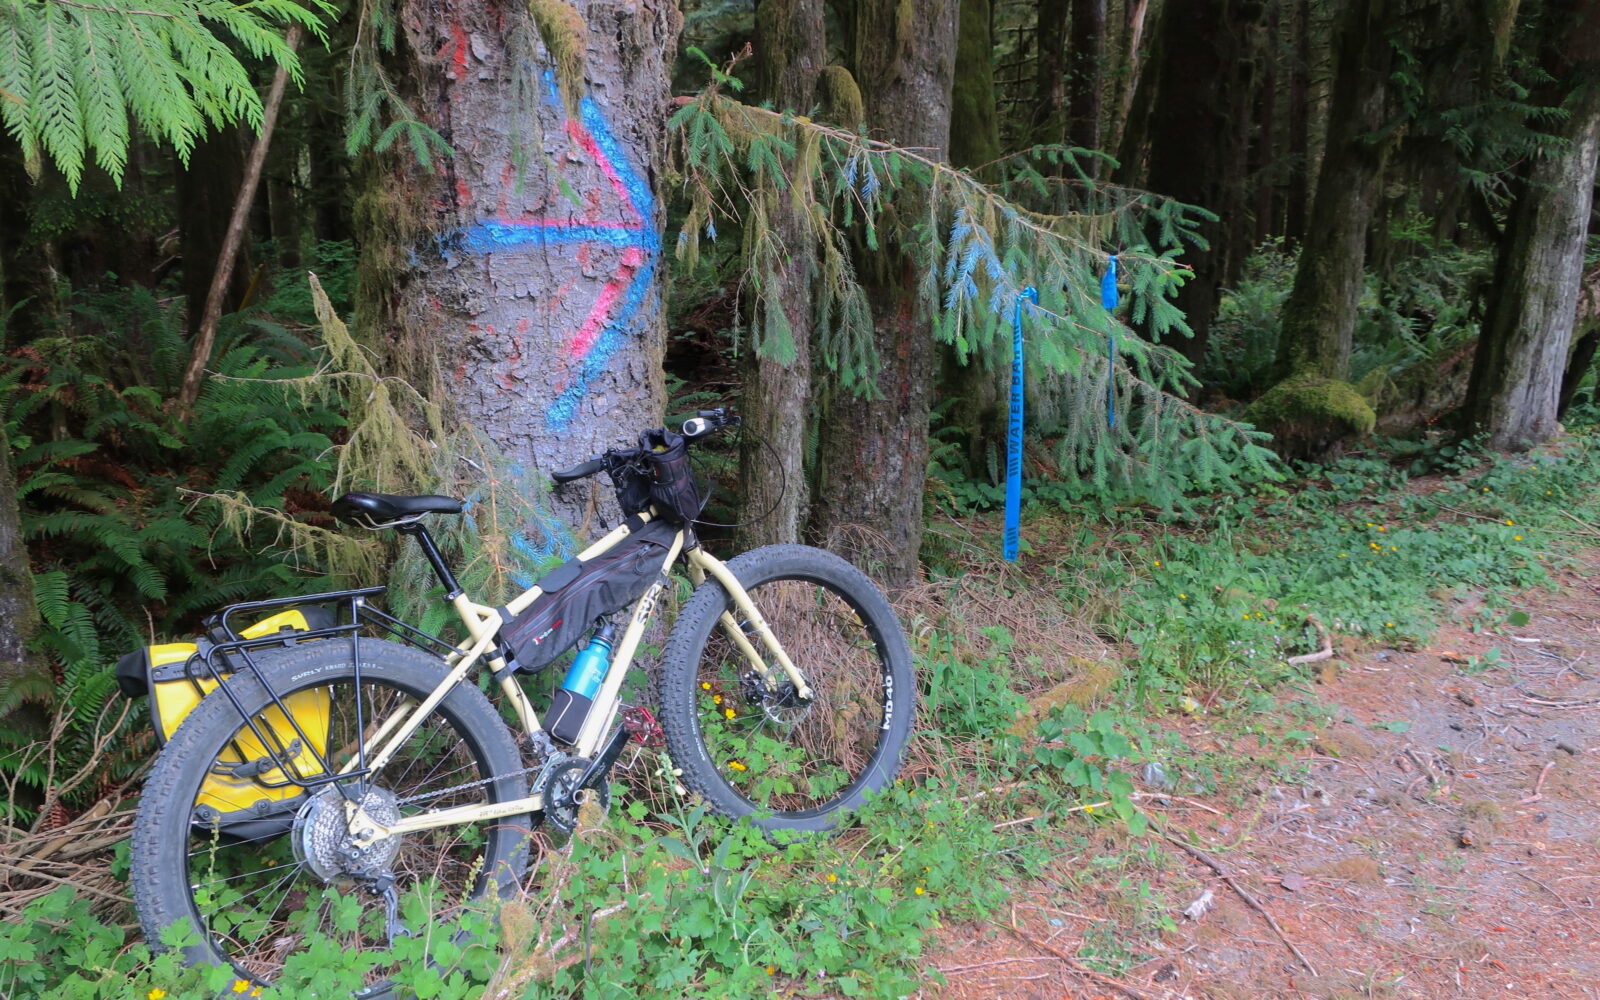 Bike against tree with painted arrows near Port Renfrew Vancouver Island British Columbia